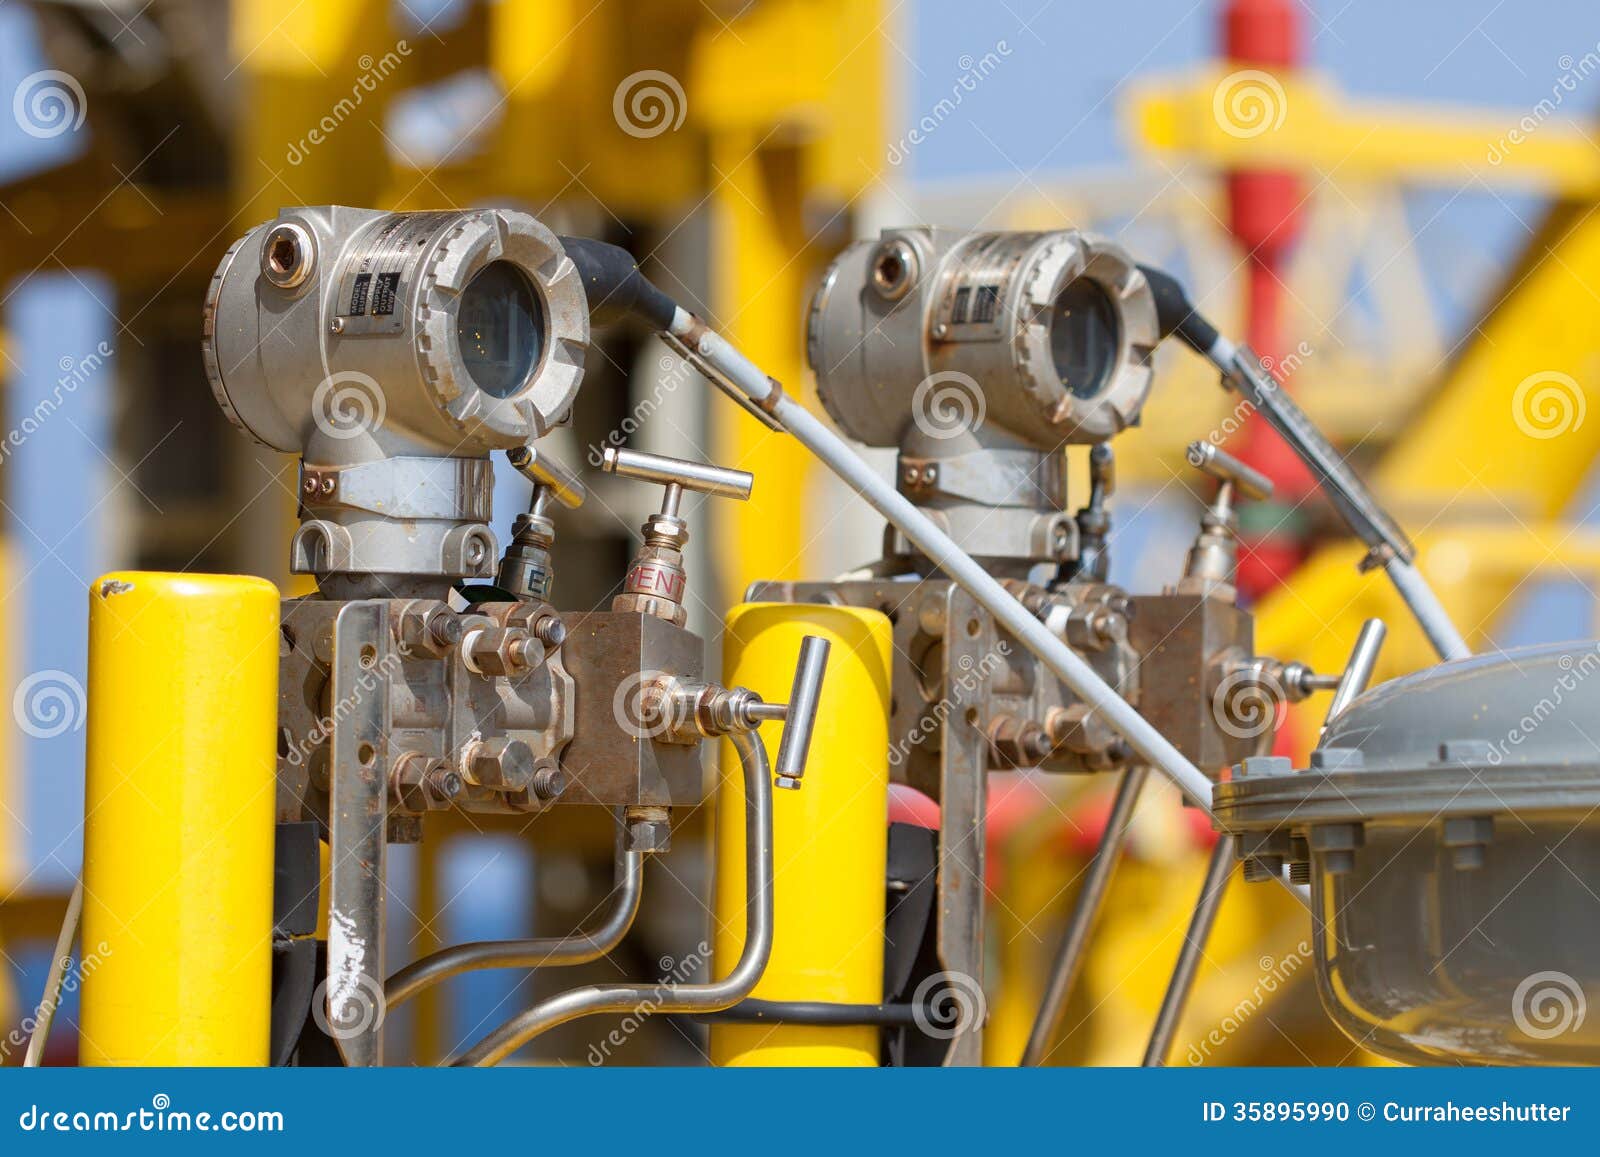 pressure transmitter in oil and gas process